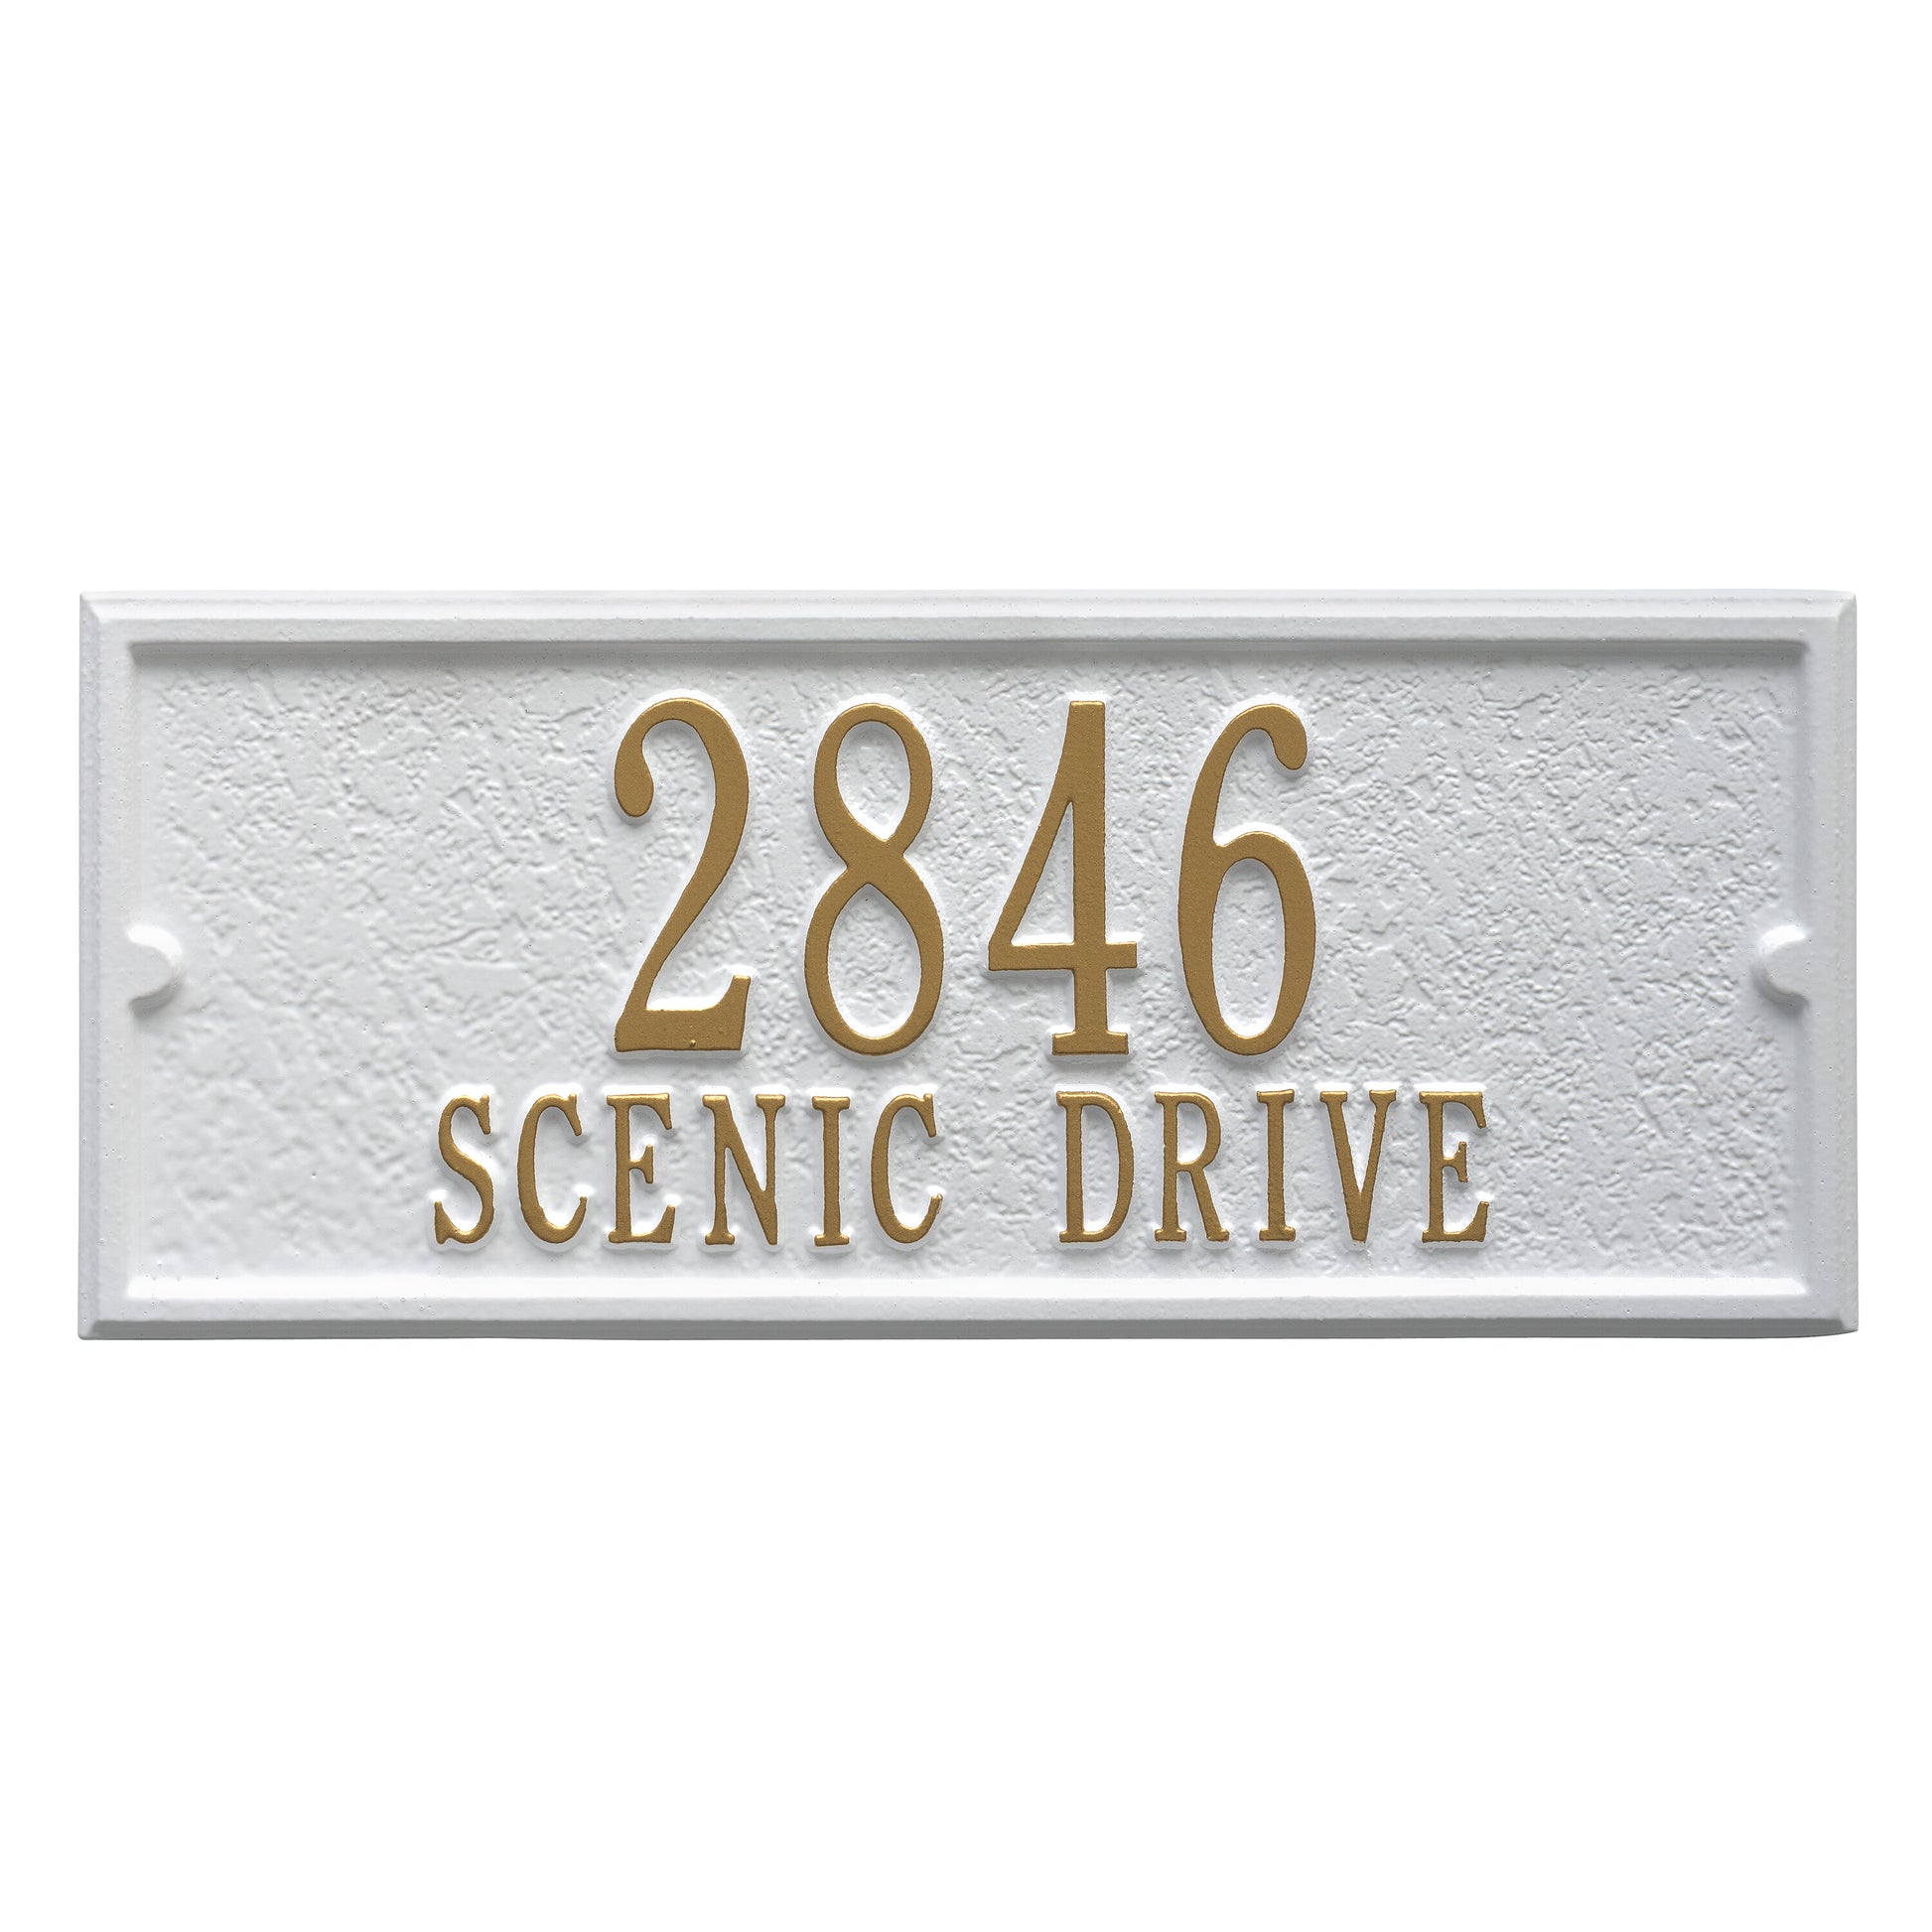 Whitehall Products Personalized Mailbox Side Address Plaque Black/gold